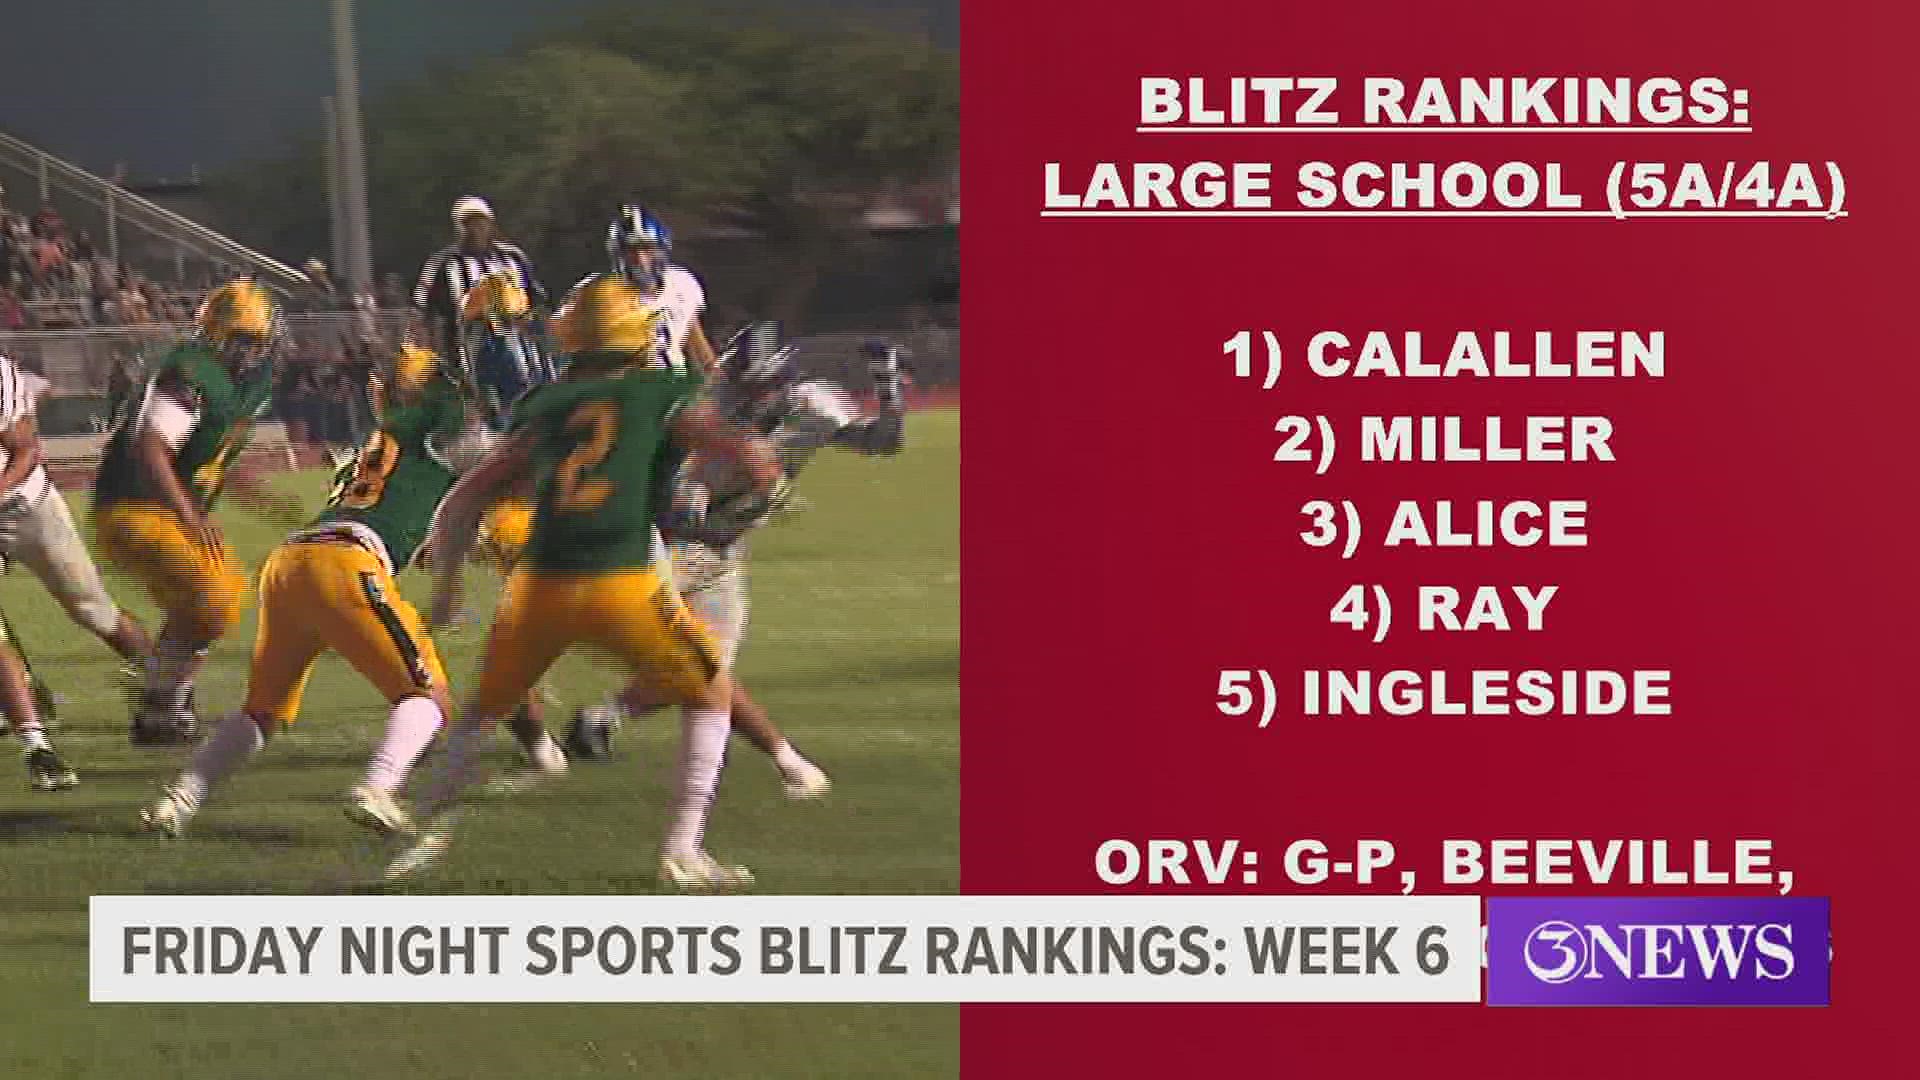 Both the large school and small school polls saw some shakeups after some Week 5 losses from the top five teams.